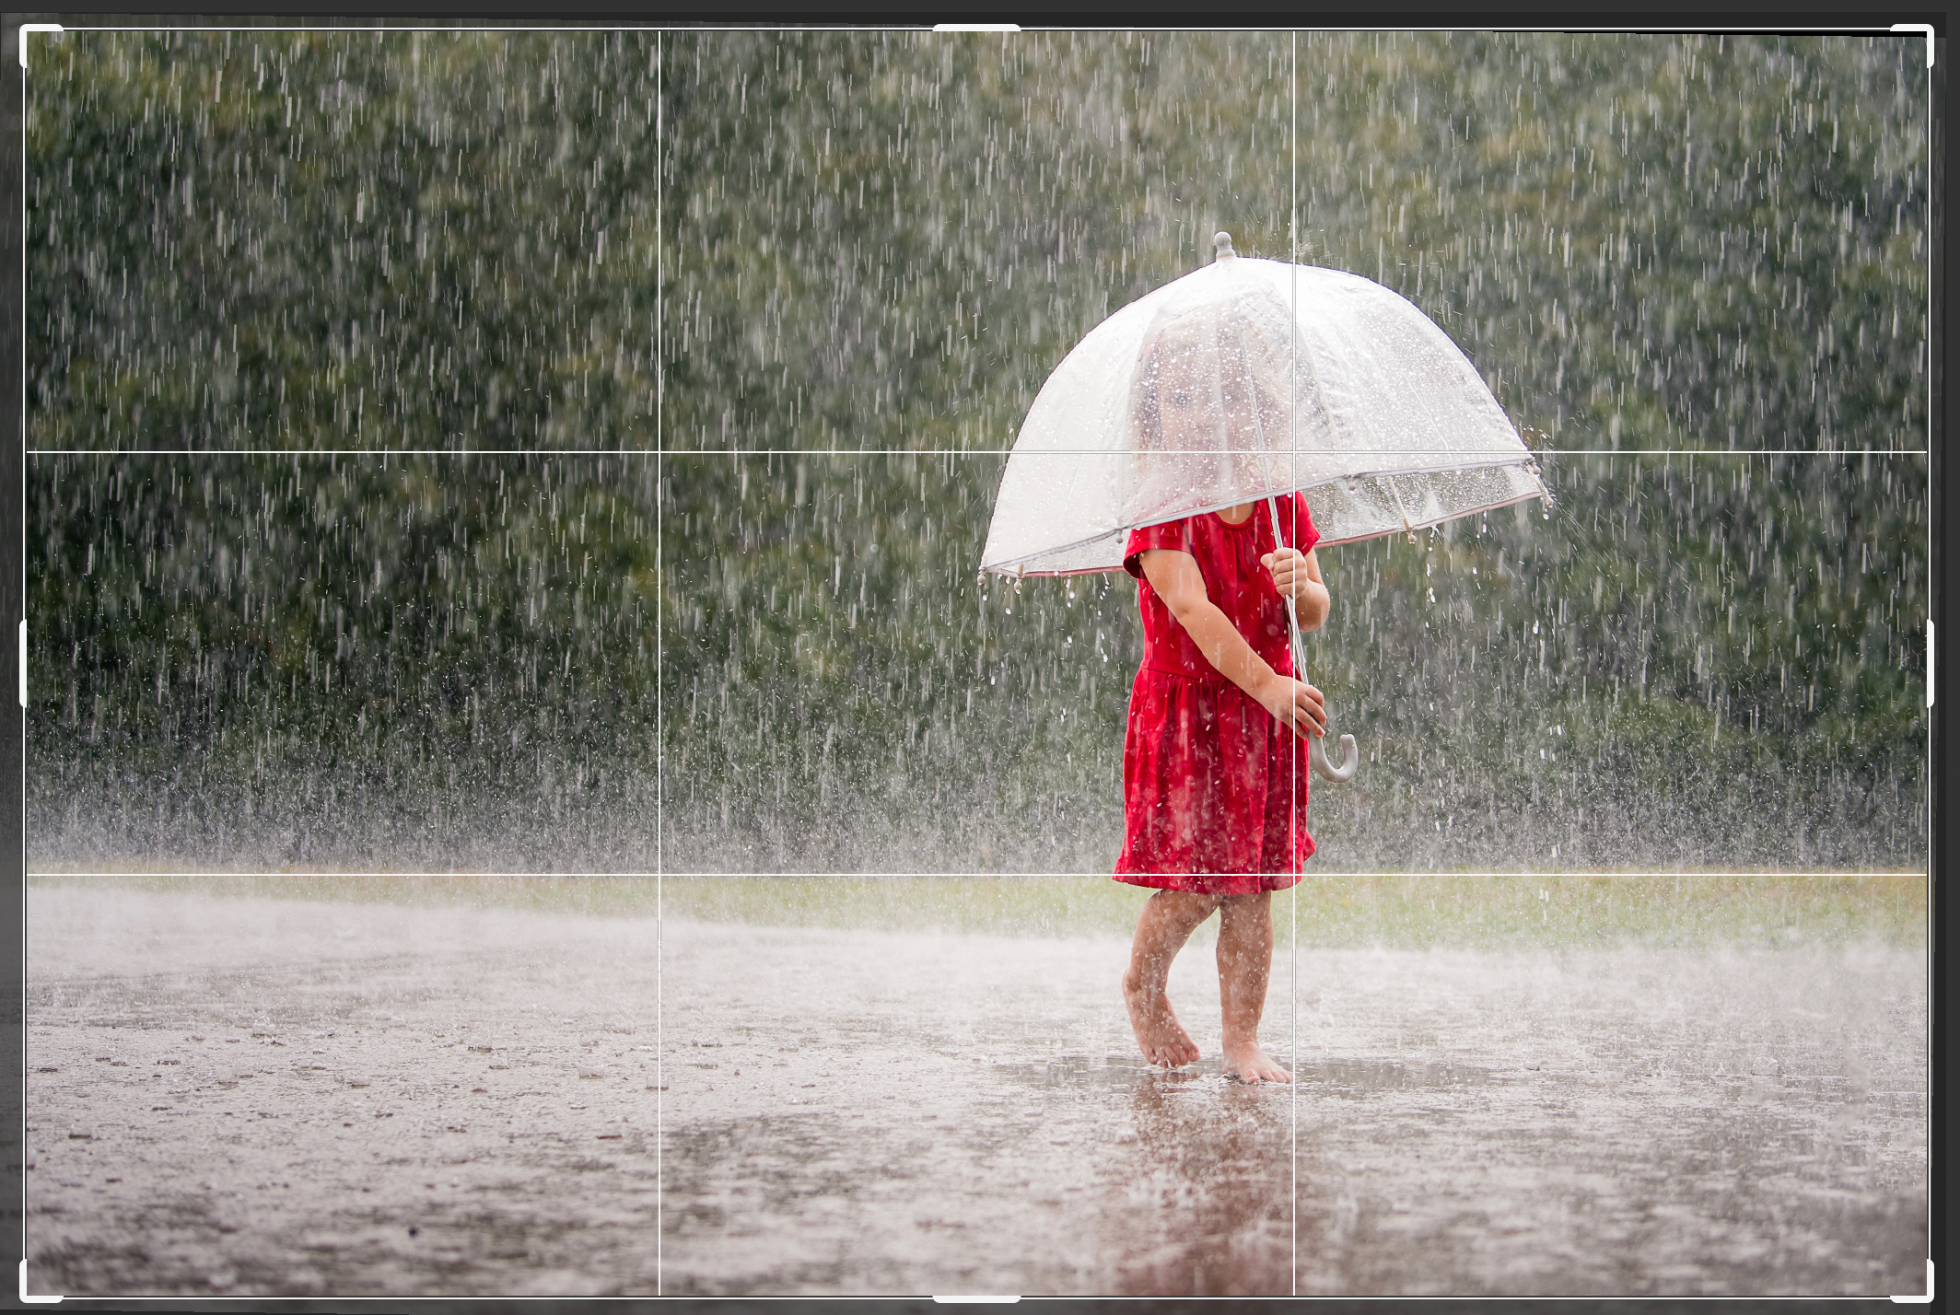 A young girl in a red dress stands gracefully in the rain, holding an umbrella.